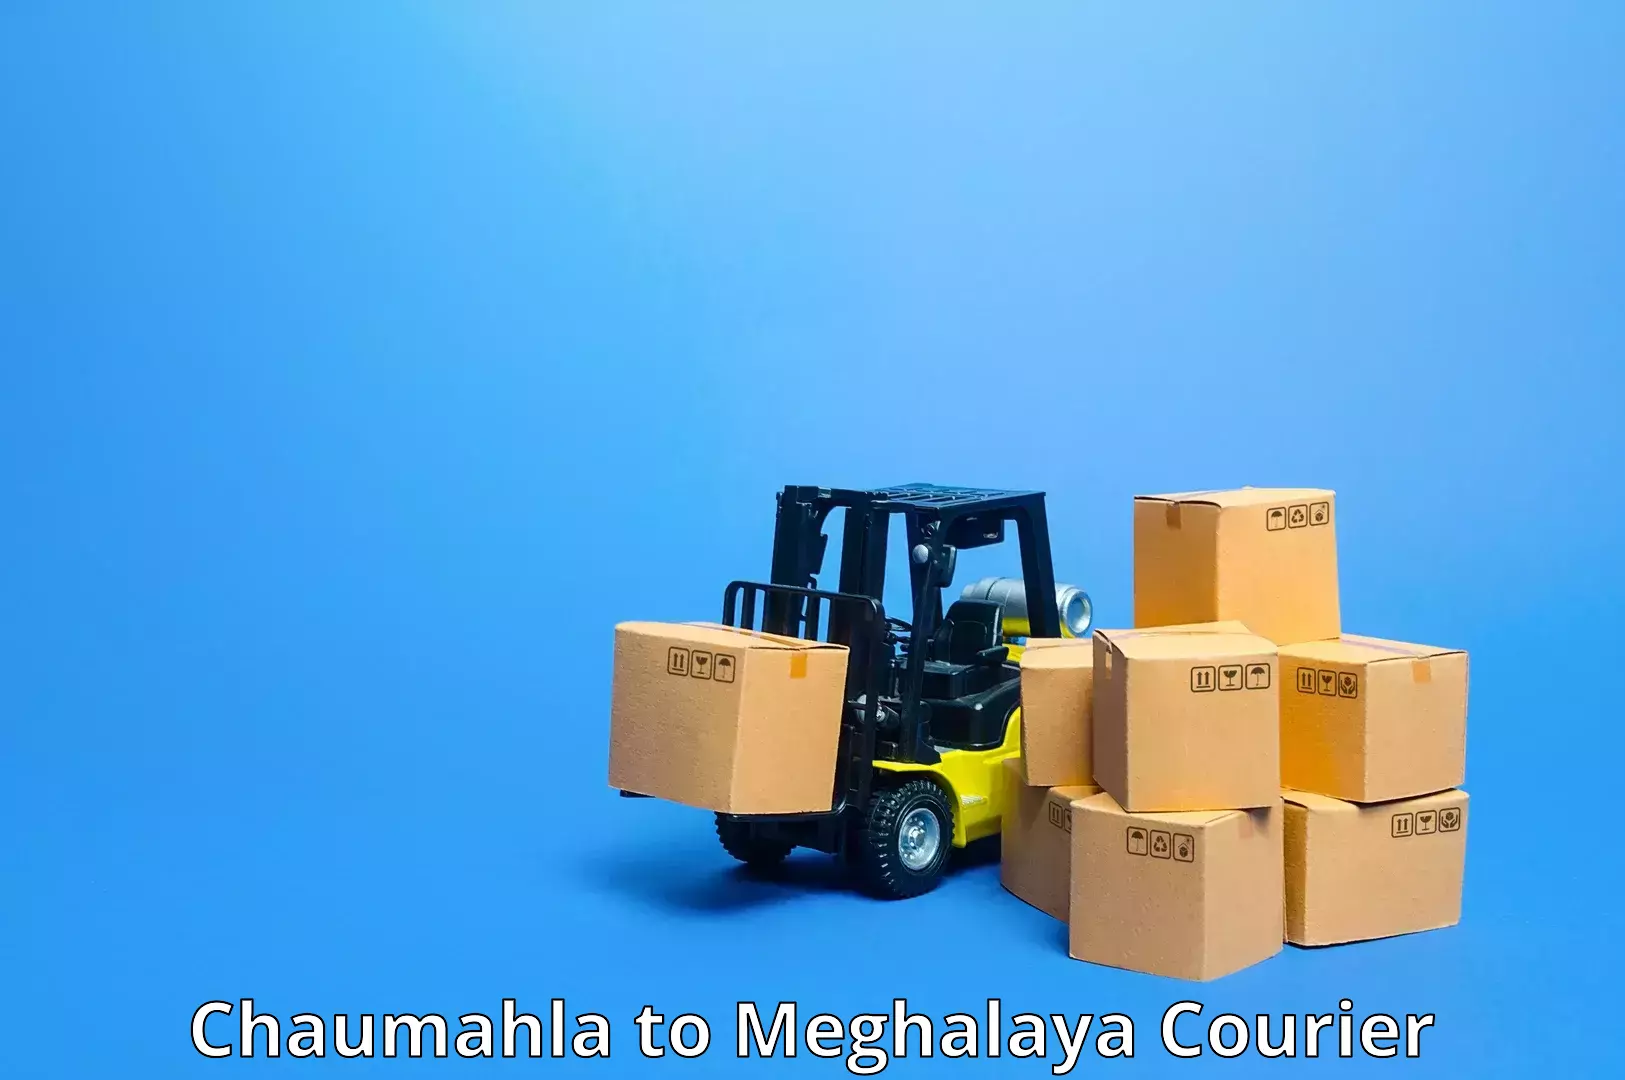 Cash on delivery service Chaumahla to Meghalaya